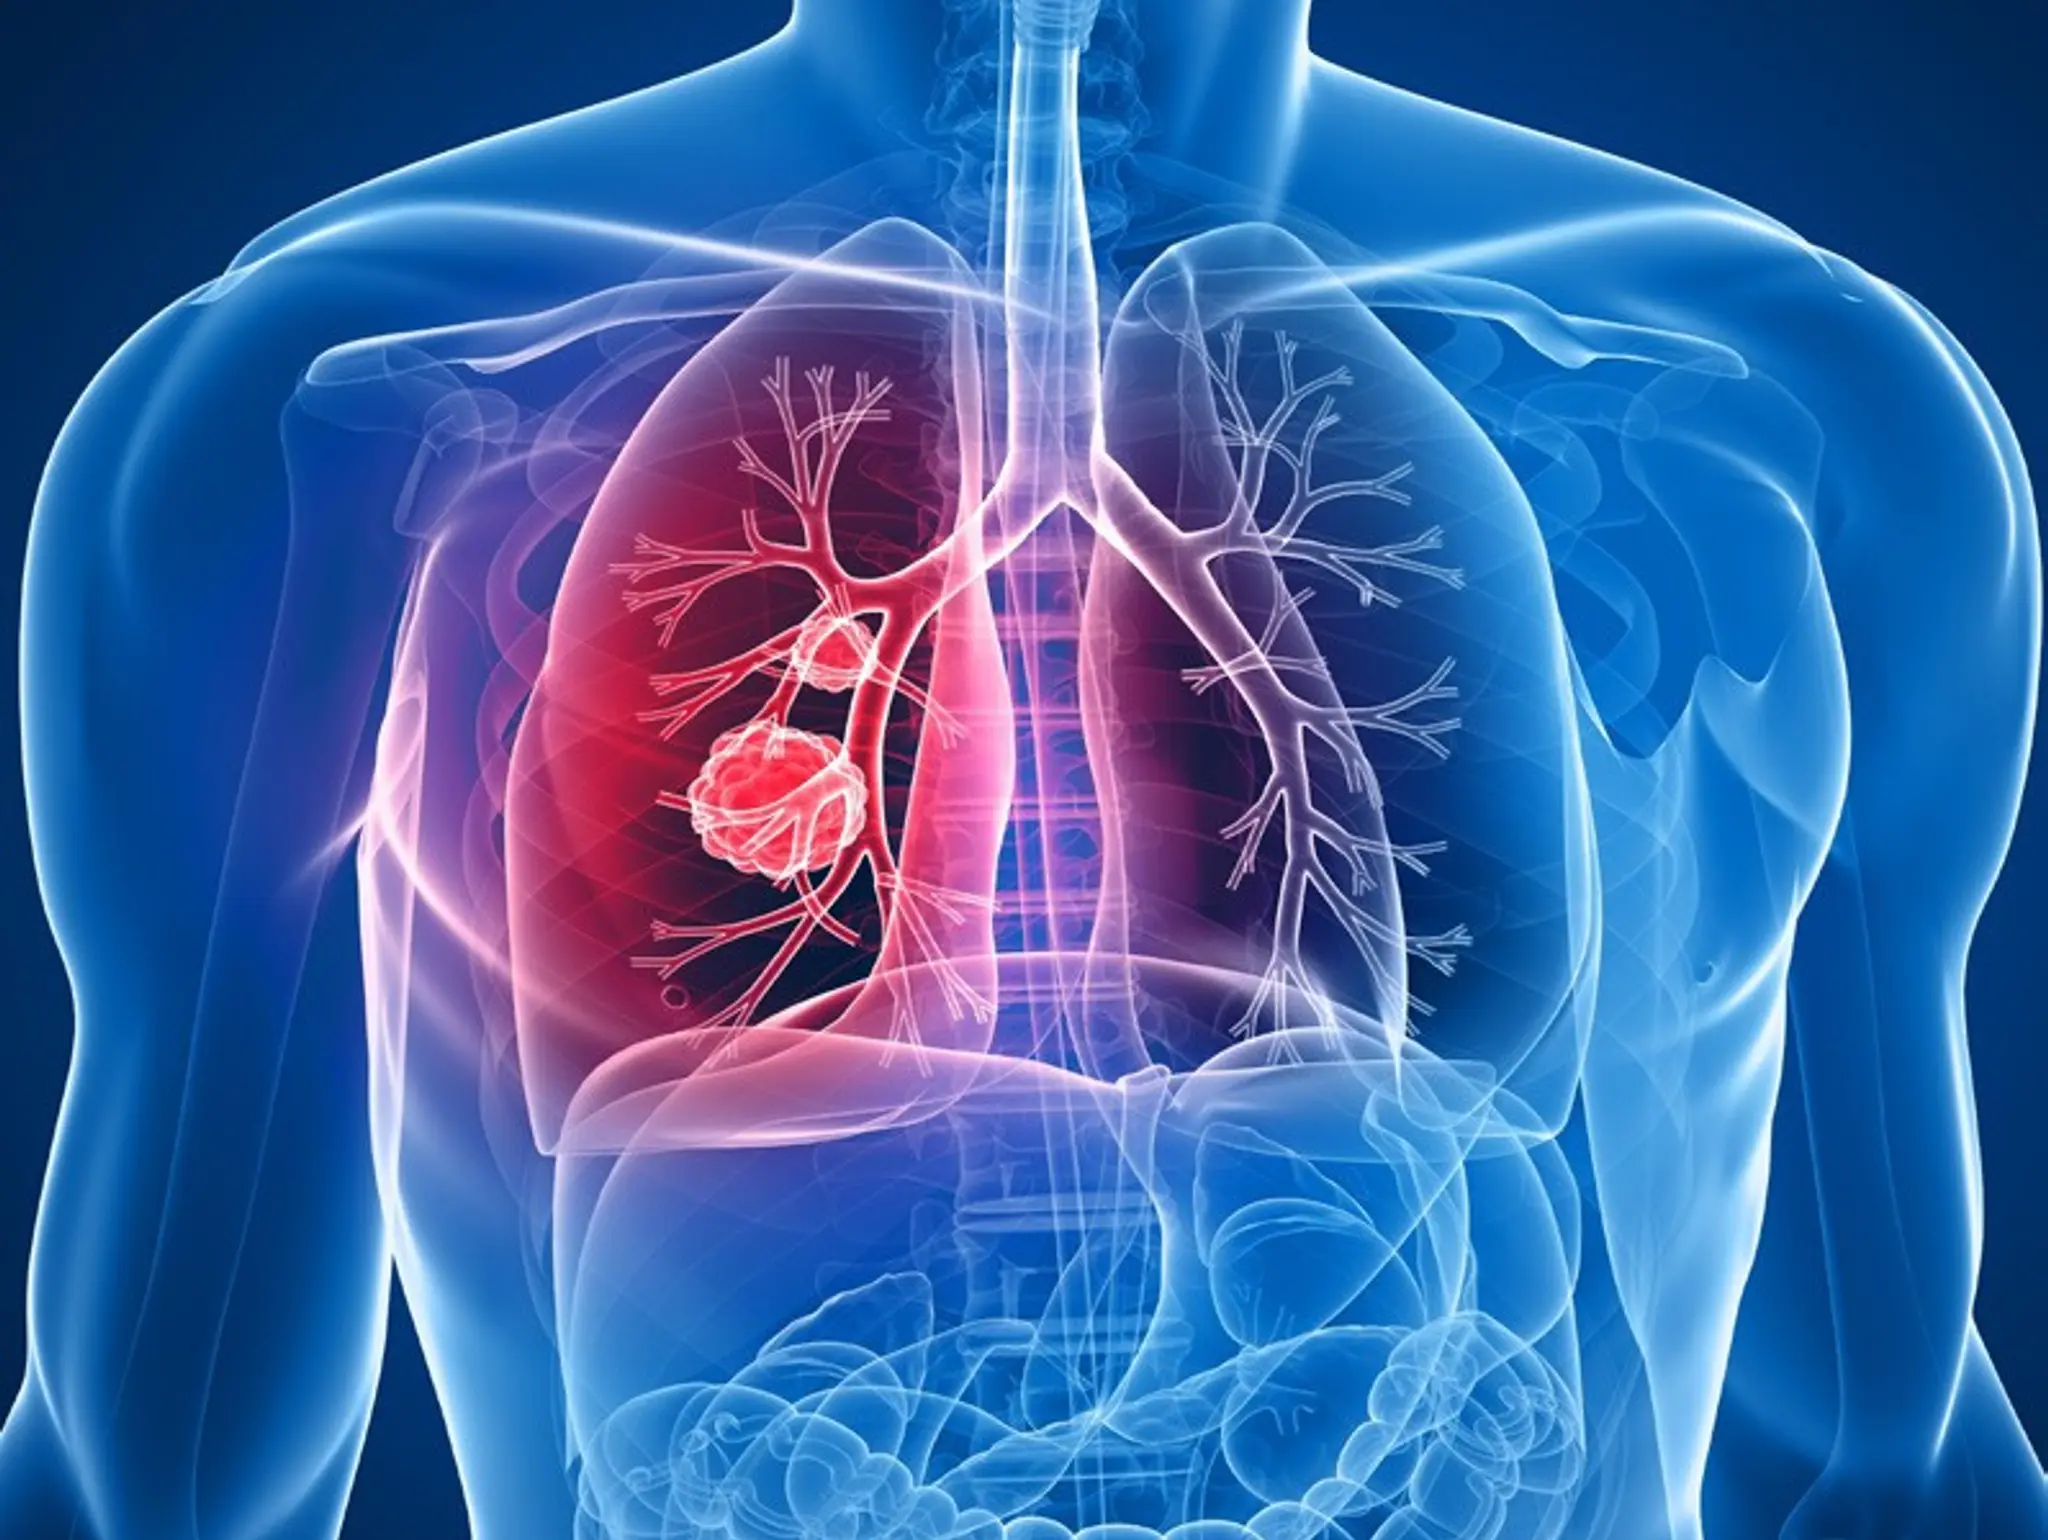 FDA approves AstraZeneca’s Tagrisso for lung cancer treatment